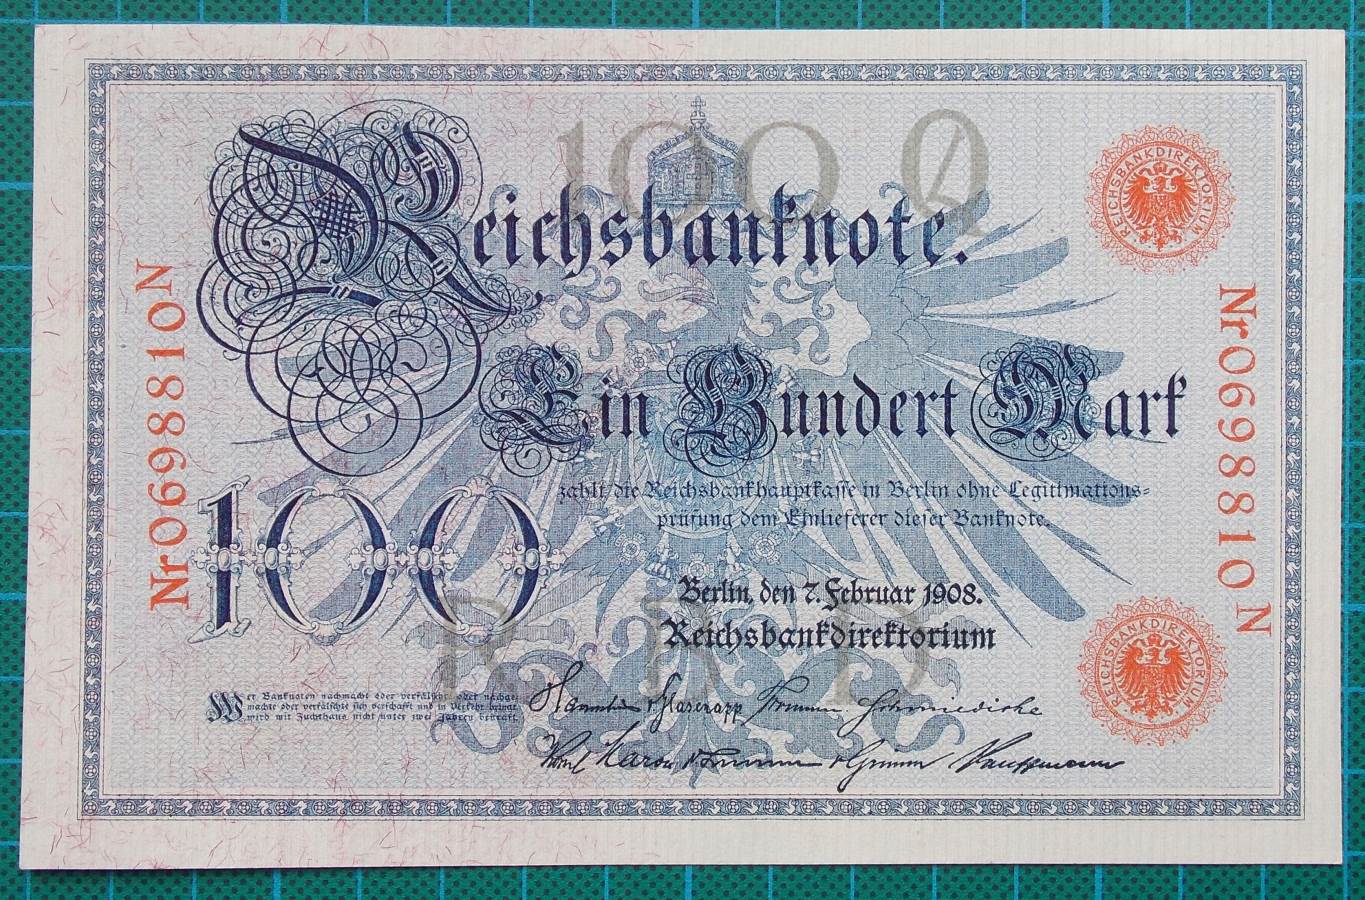 Details about   GERMANY REICHSBANKNOTE 100 MARK 1908/sold as each 